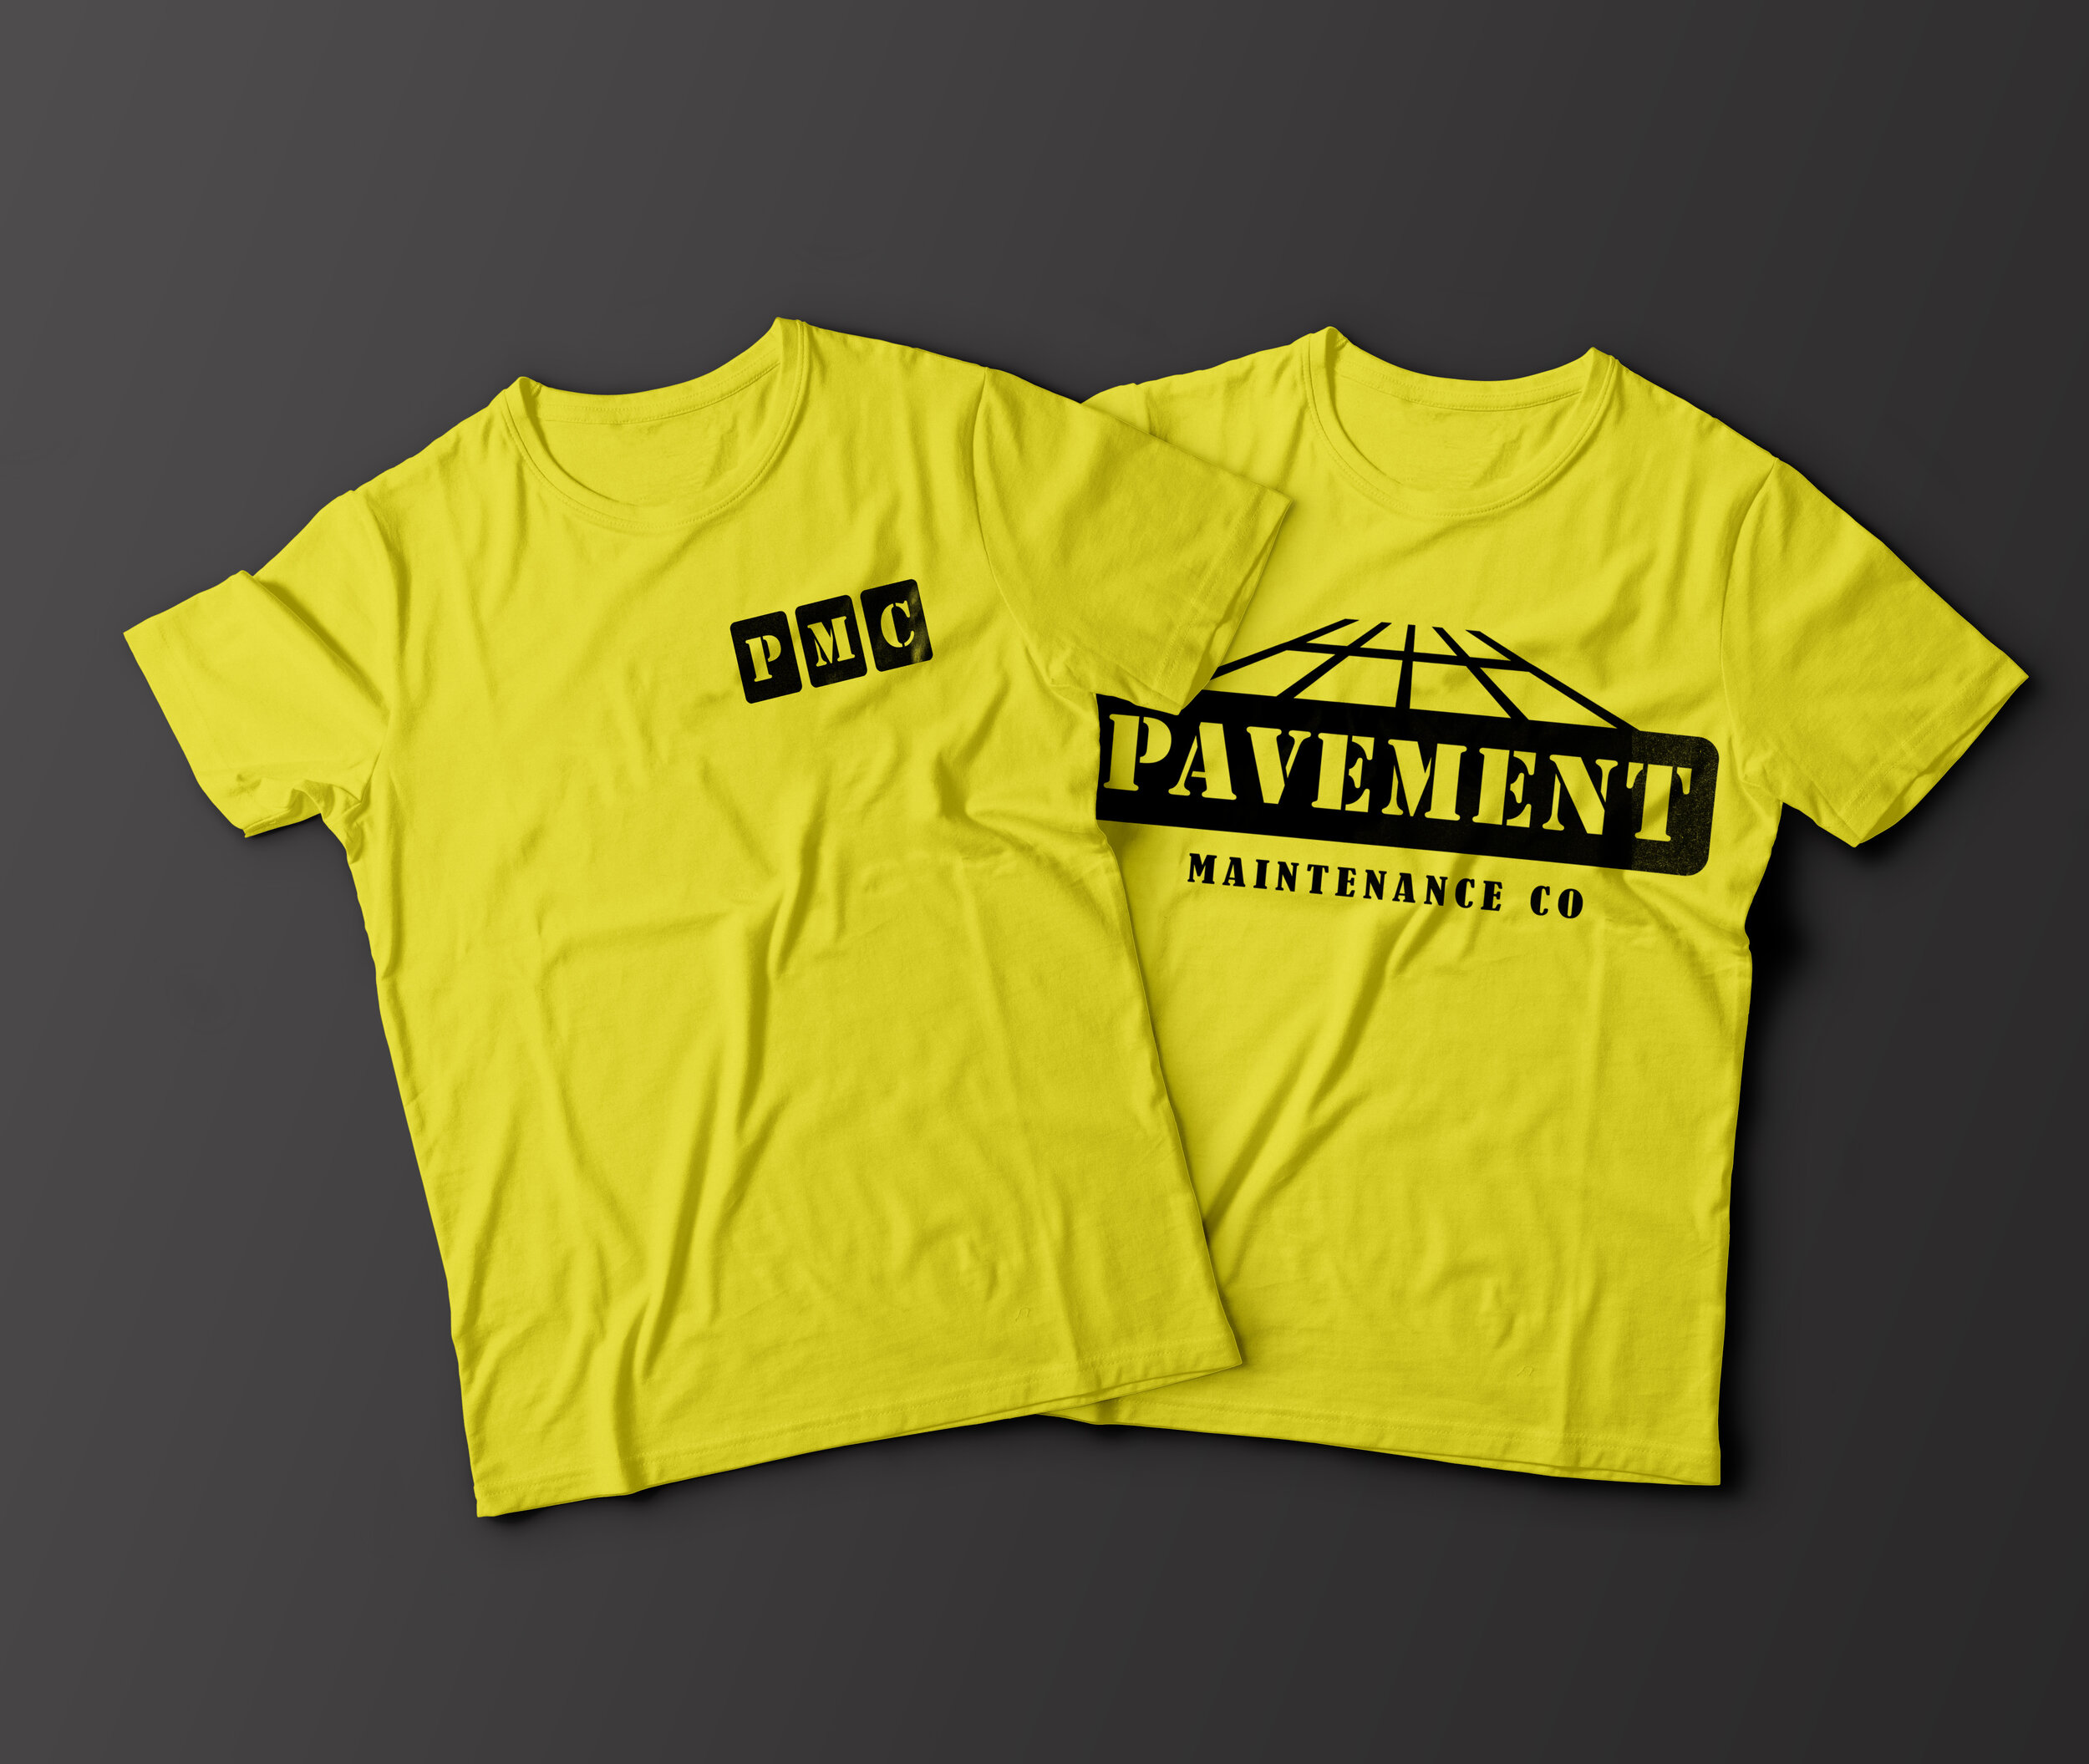 Brand apparel design for employees.